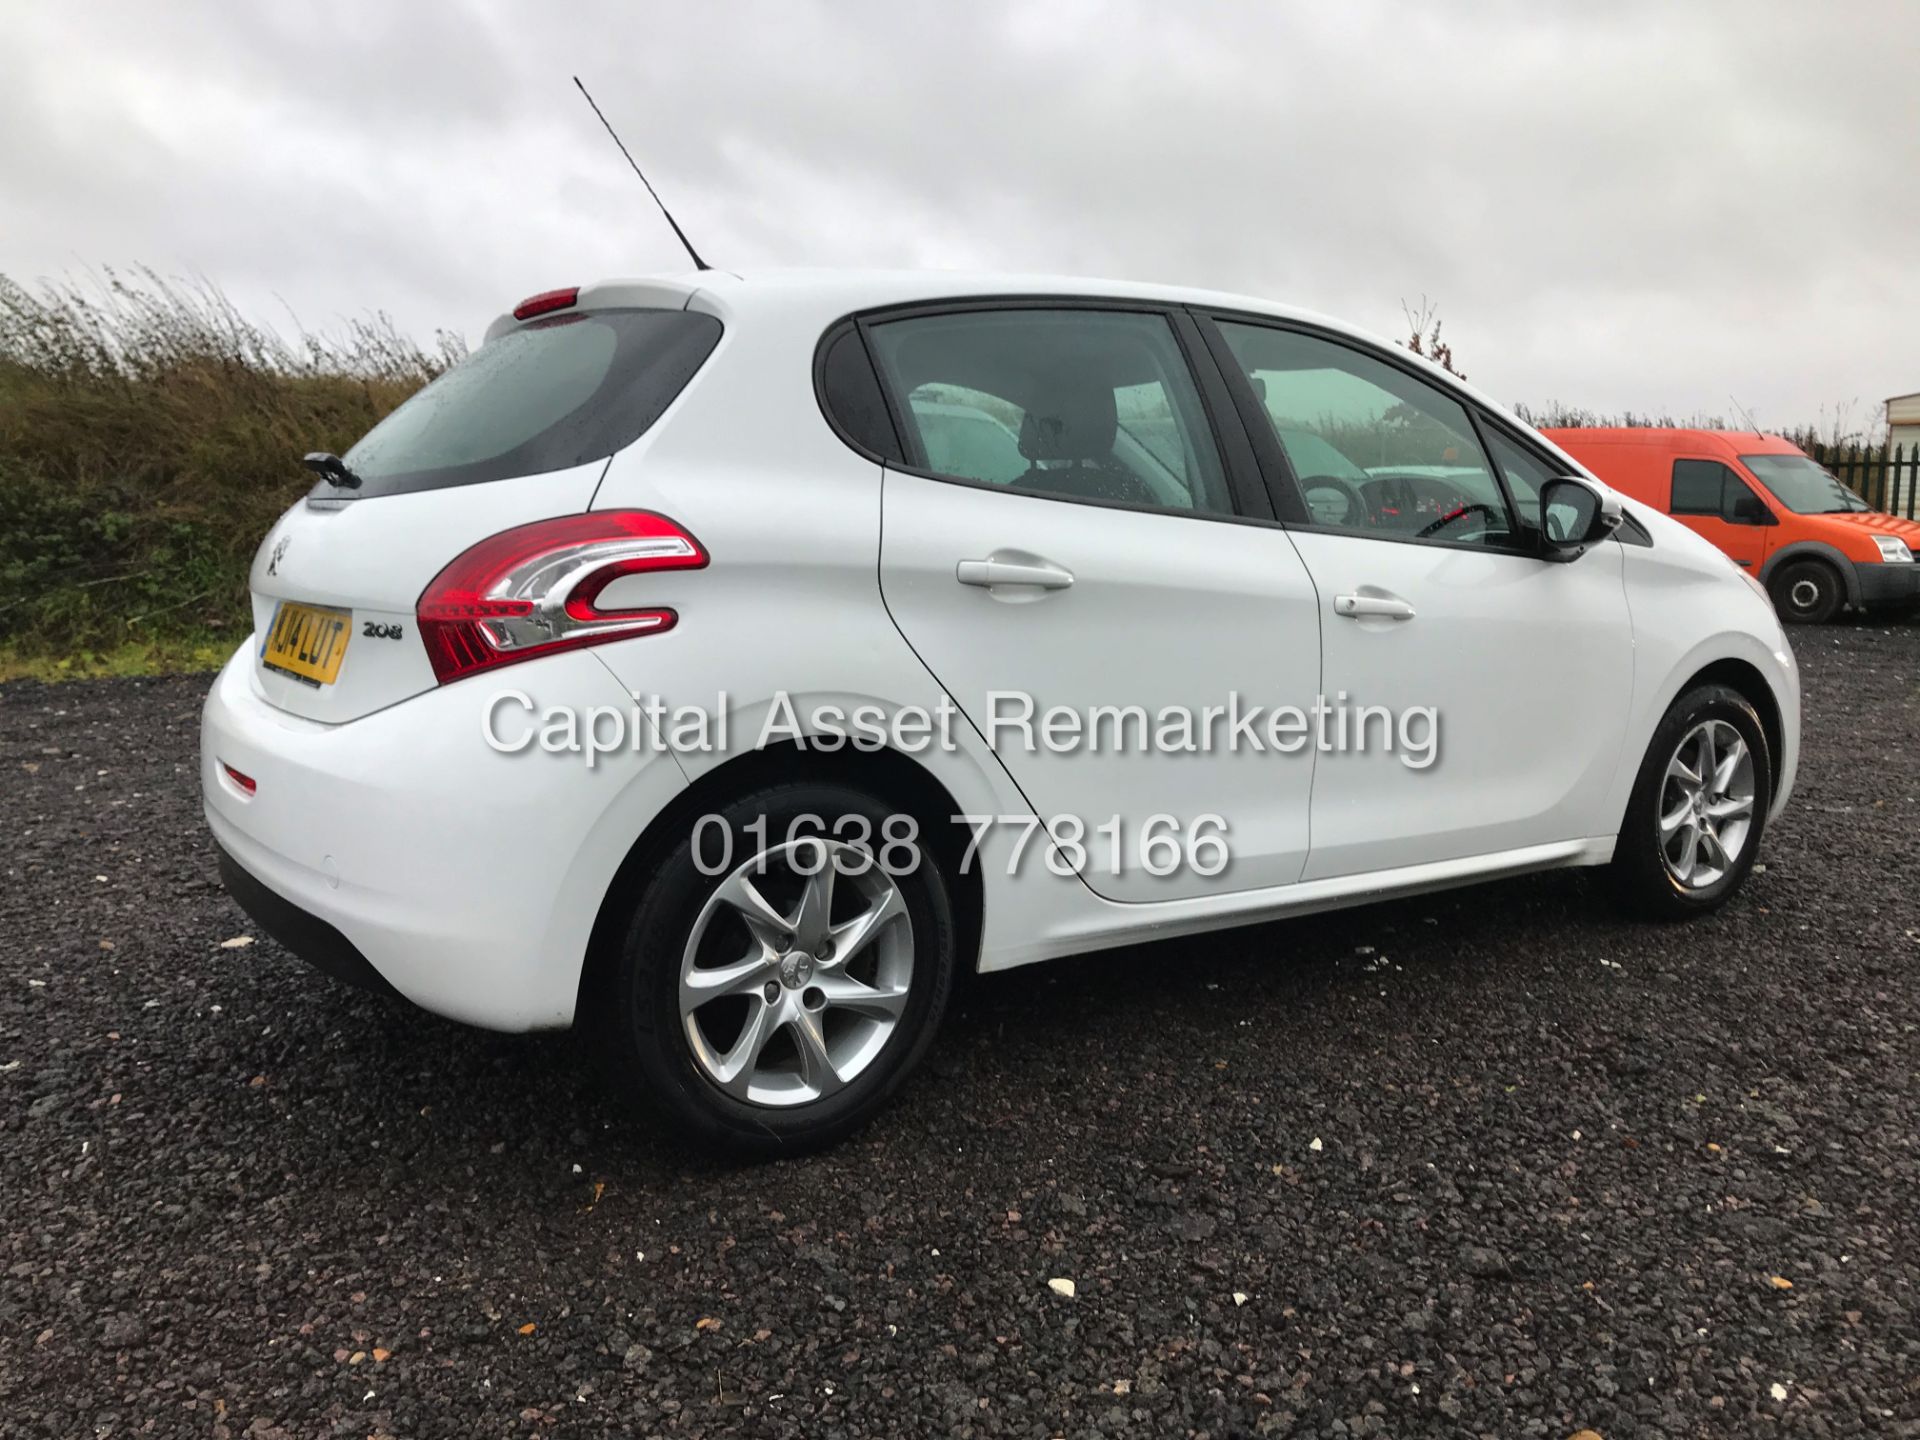 (ON SALE) PEUGEOT 208 1.4HDI "ACTIVE" 1 PREVIOUS KEEPER FSH (14 REG) RECENT SERVICE-AIR CON *NO VAT* - Image 9 of 23